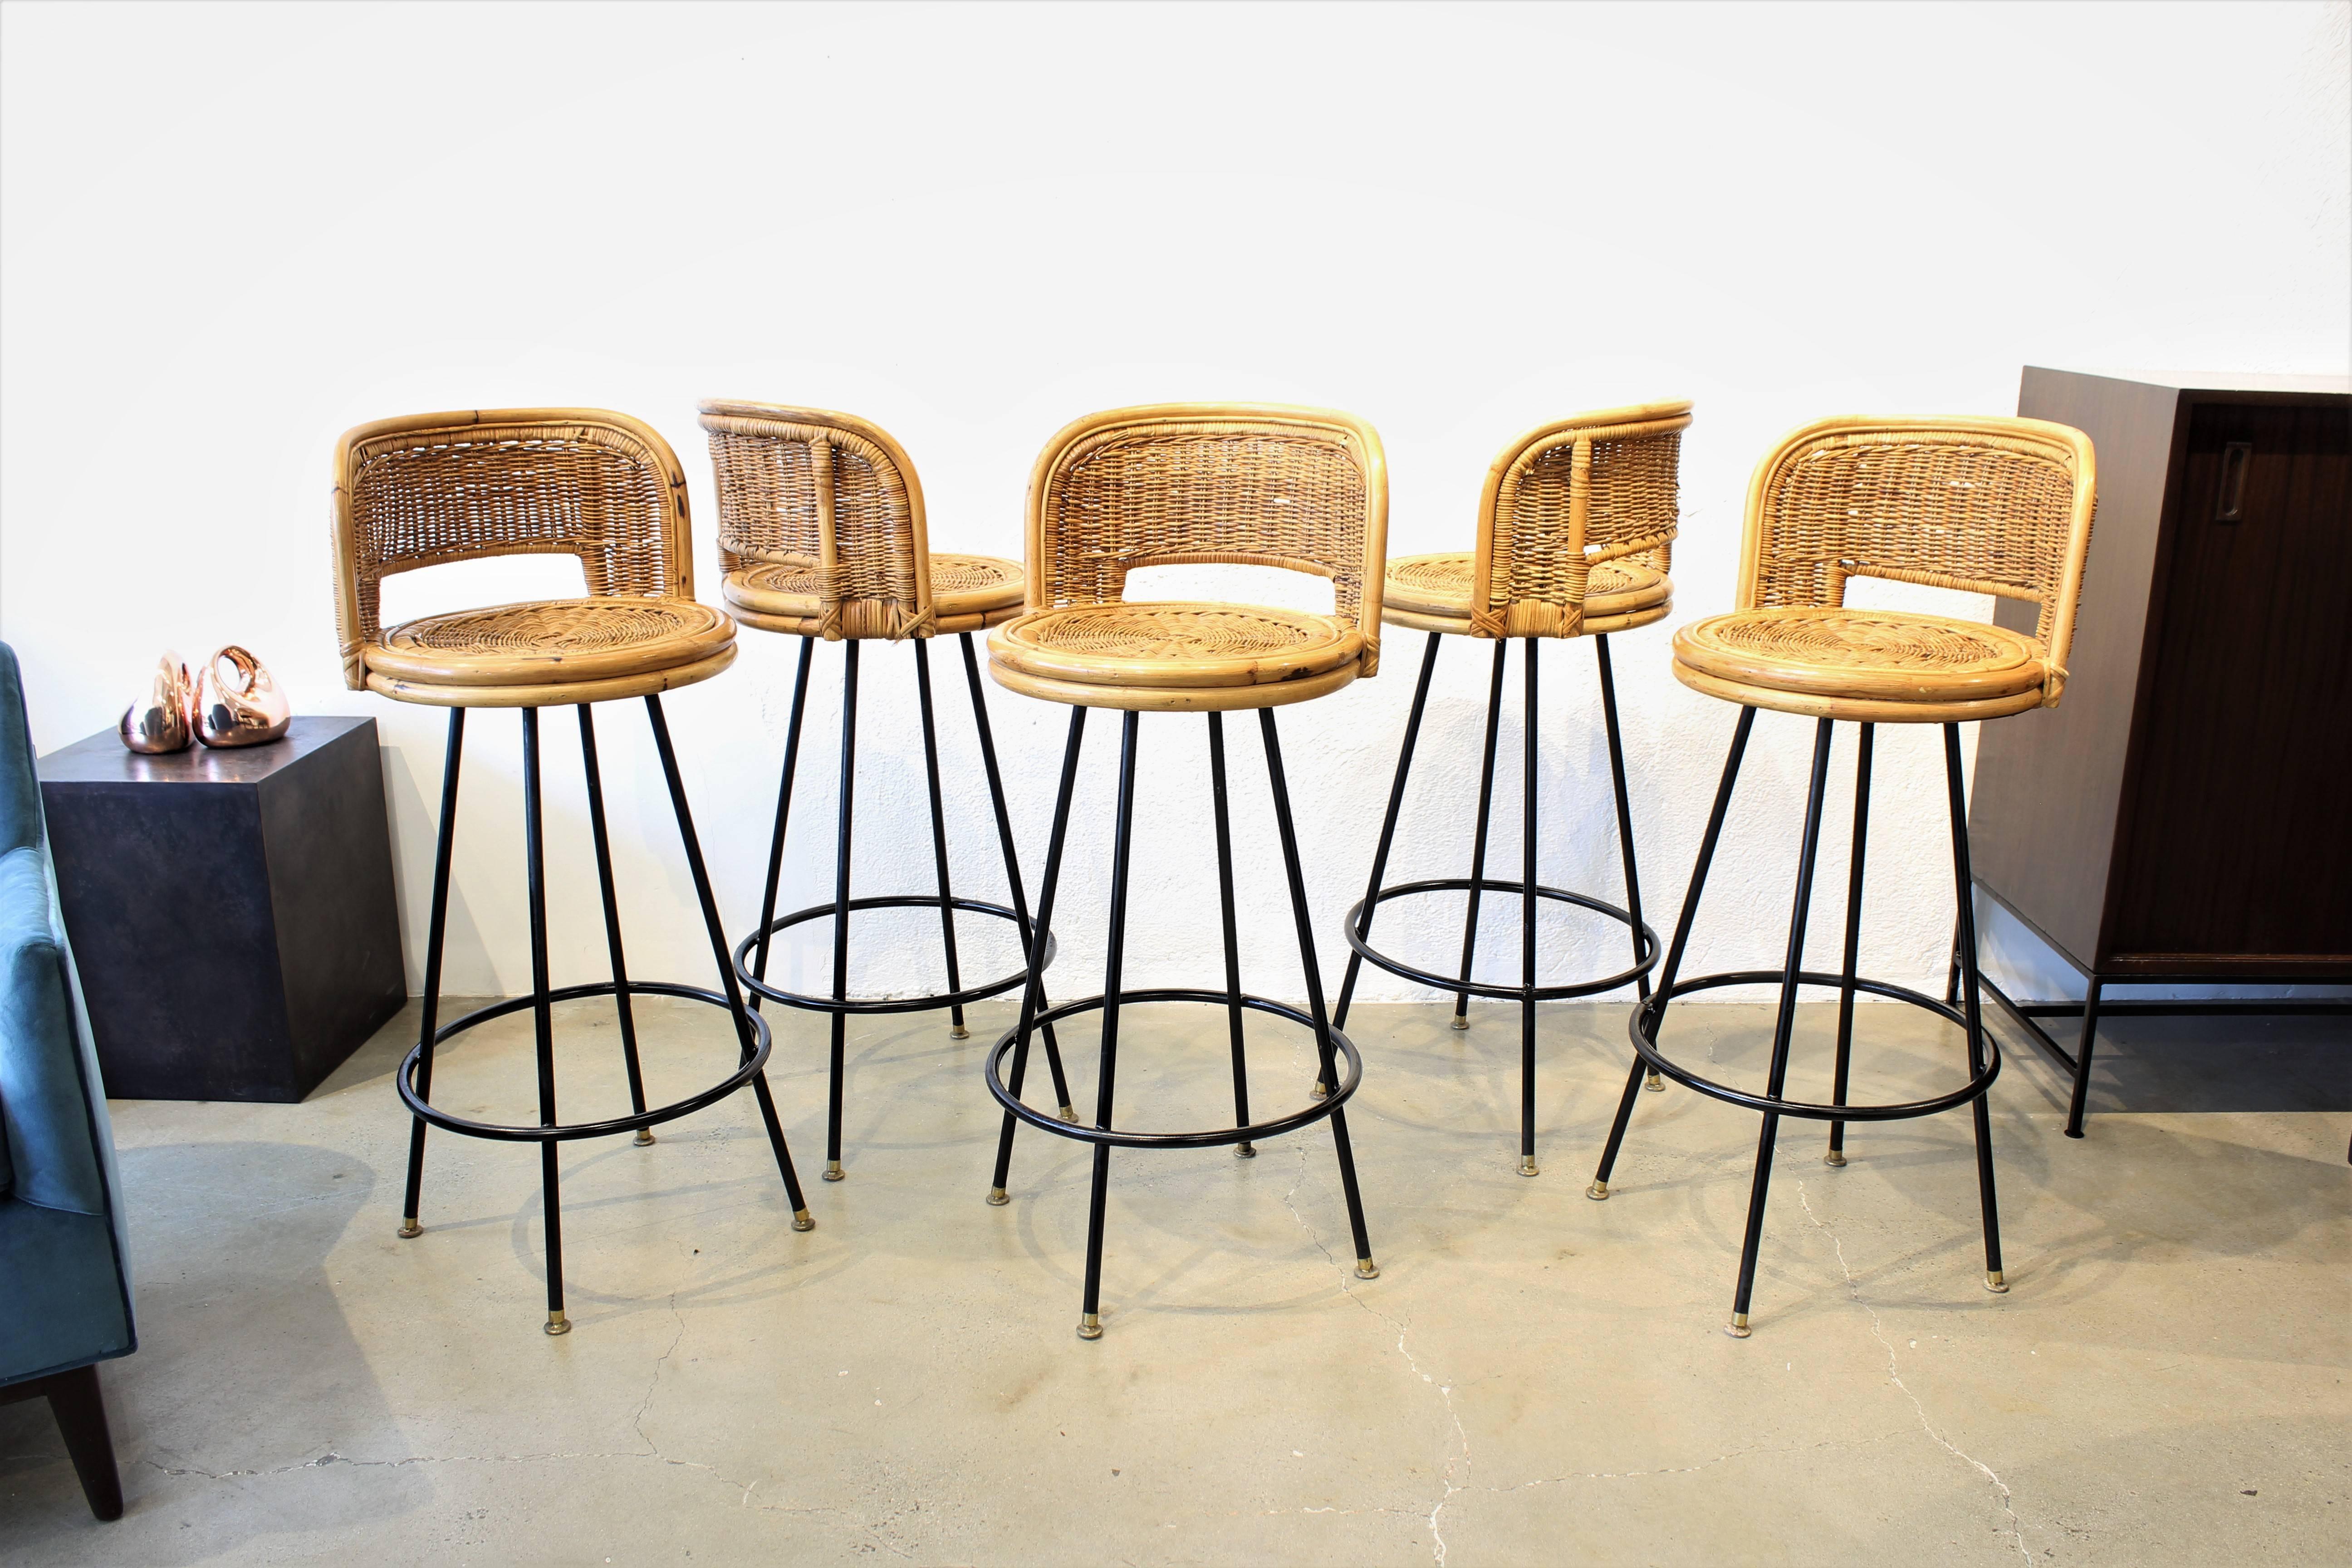 Set of five Pristine Rattan and wrought iron bar stools by Seng of Chicago, 1960s. This are amazing and just in time for your palm springs summer tiki bar! Awesome vintage condition with very little wear to the seats.

Refine Limited is a curated